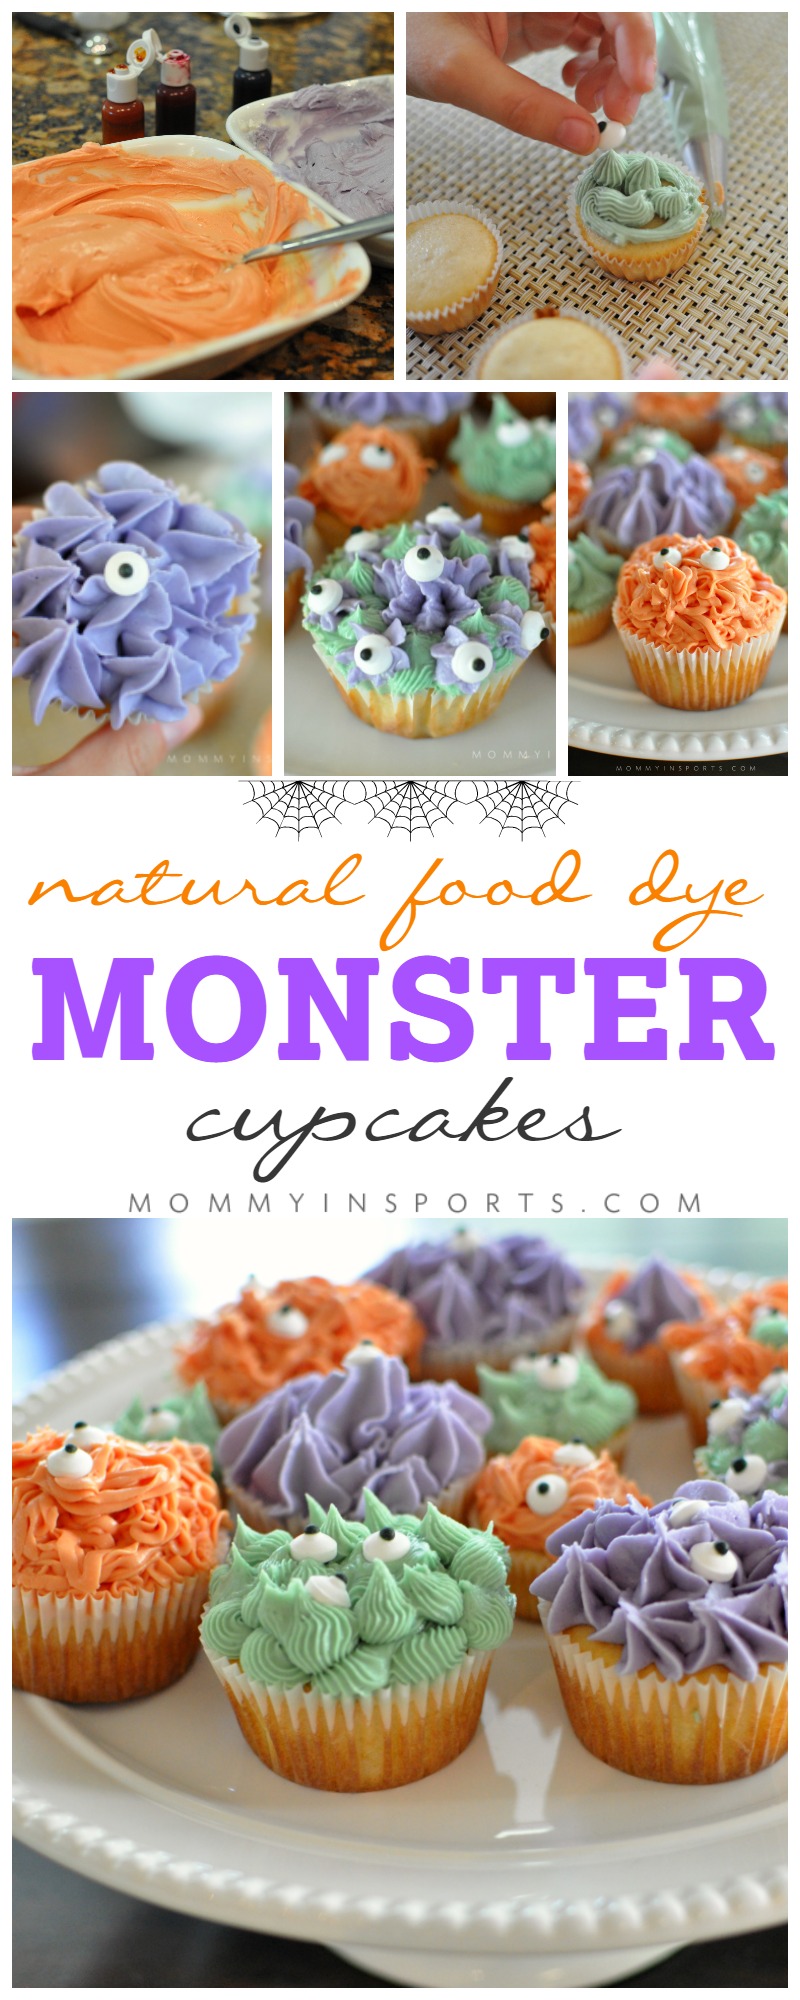 Looking for a scary treat that isn't full of harmful chemicals? Try these natural food dye monster cupcakes, which are so easy to make your kids can do them! There's no wrong way to create a monster!